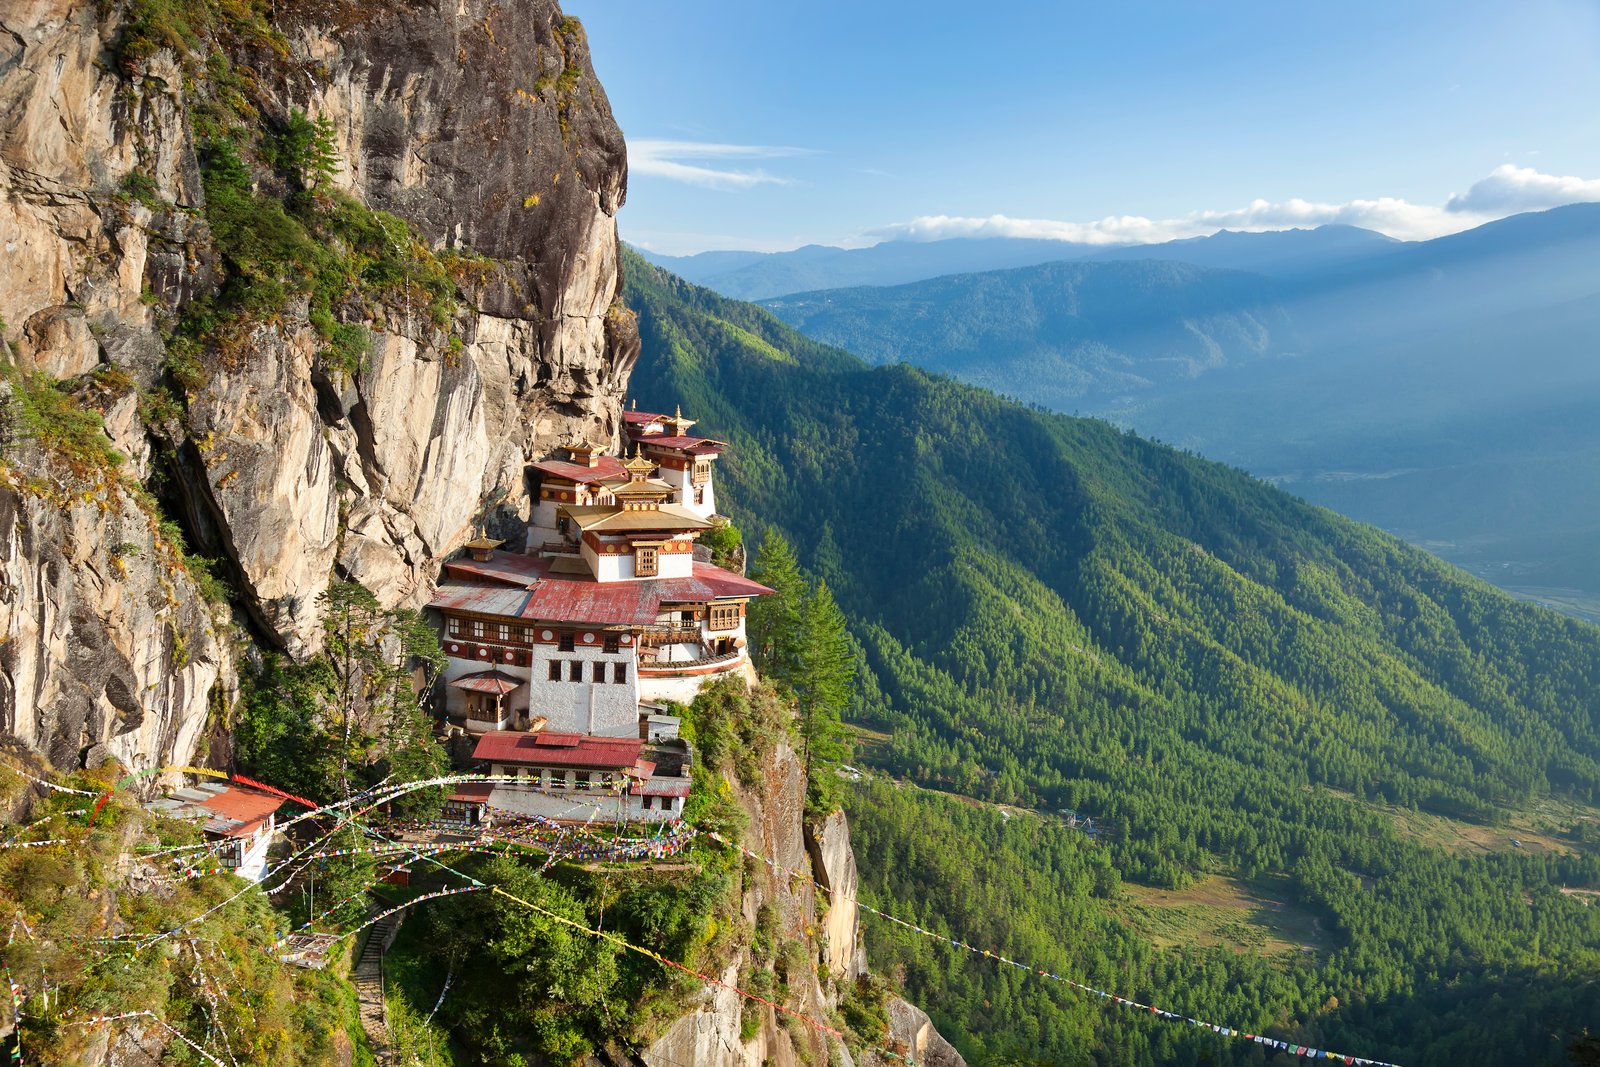 Himalayan Buddhist temple complex perched on a vertical rockface.